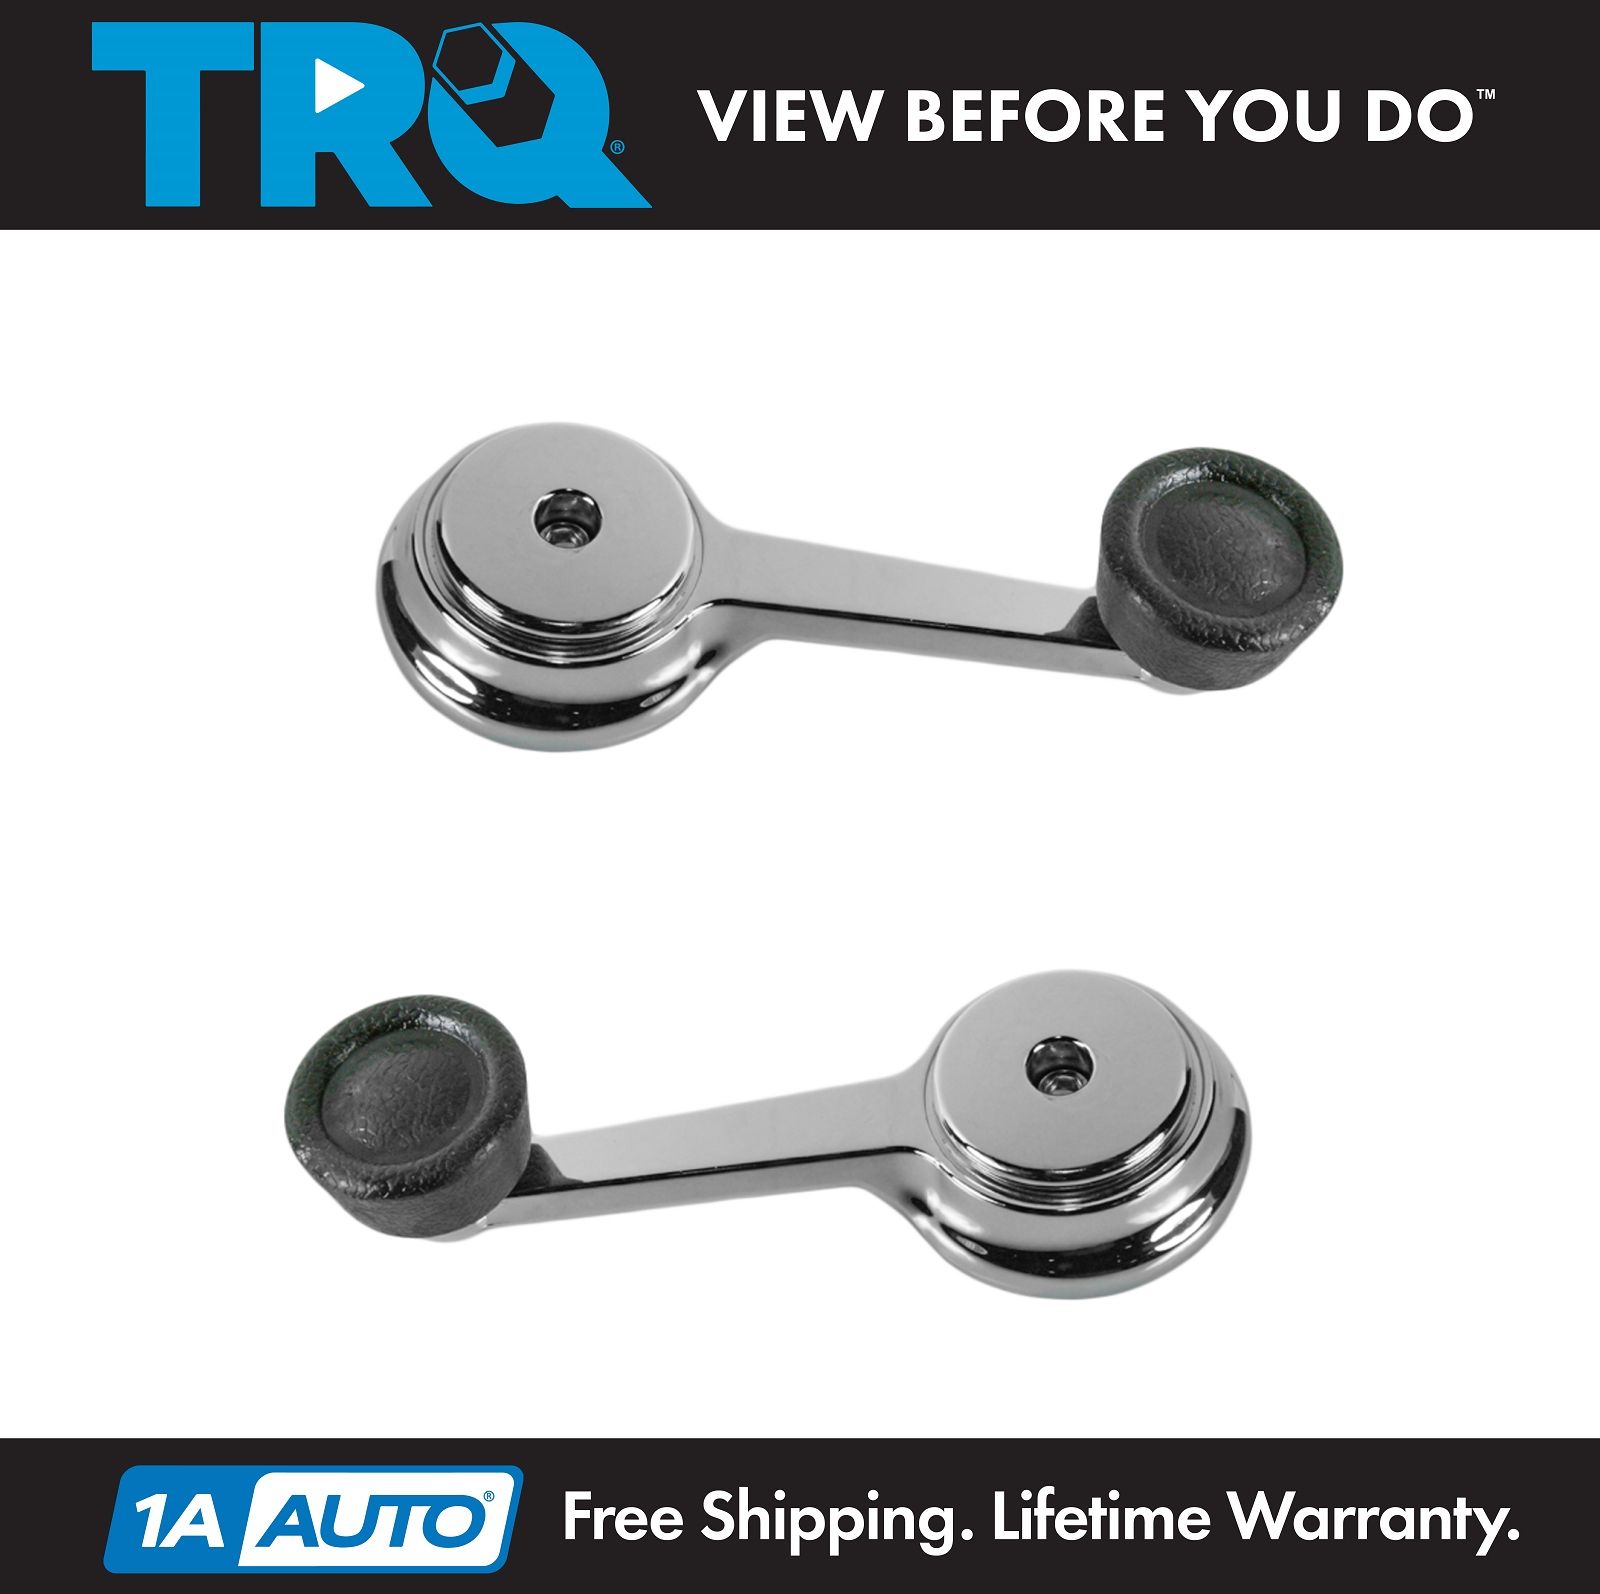 Details About Window Crank Handle Interior Pair Chrome For Jeep Cherokee Wagoneer Wrangler New